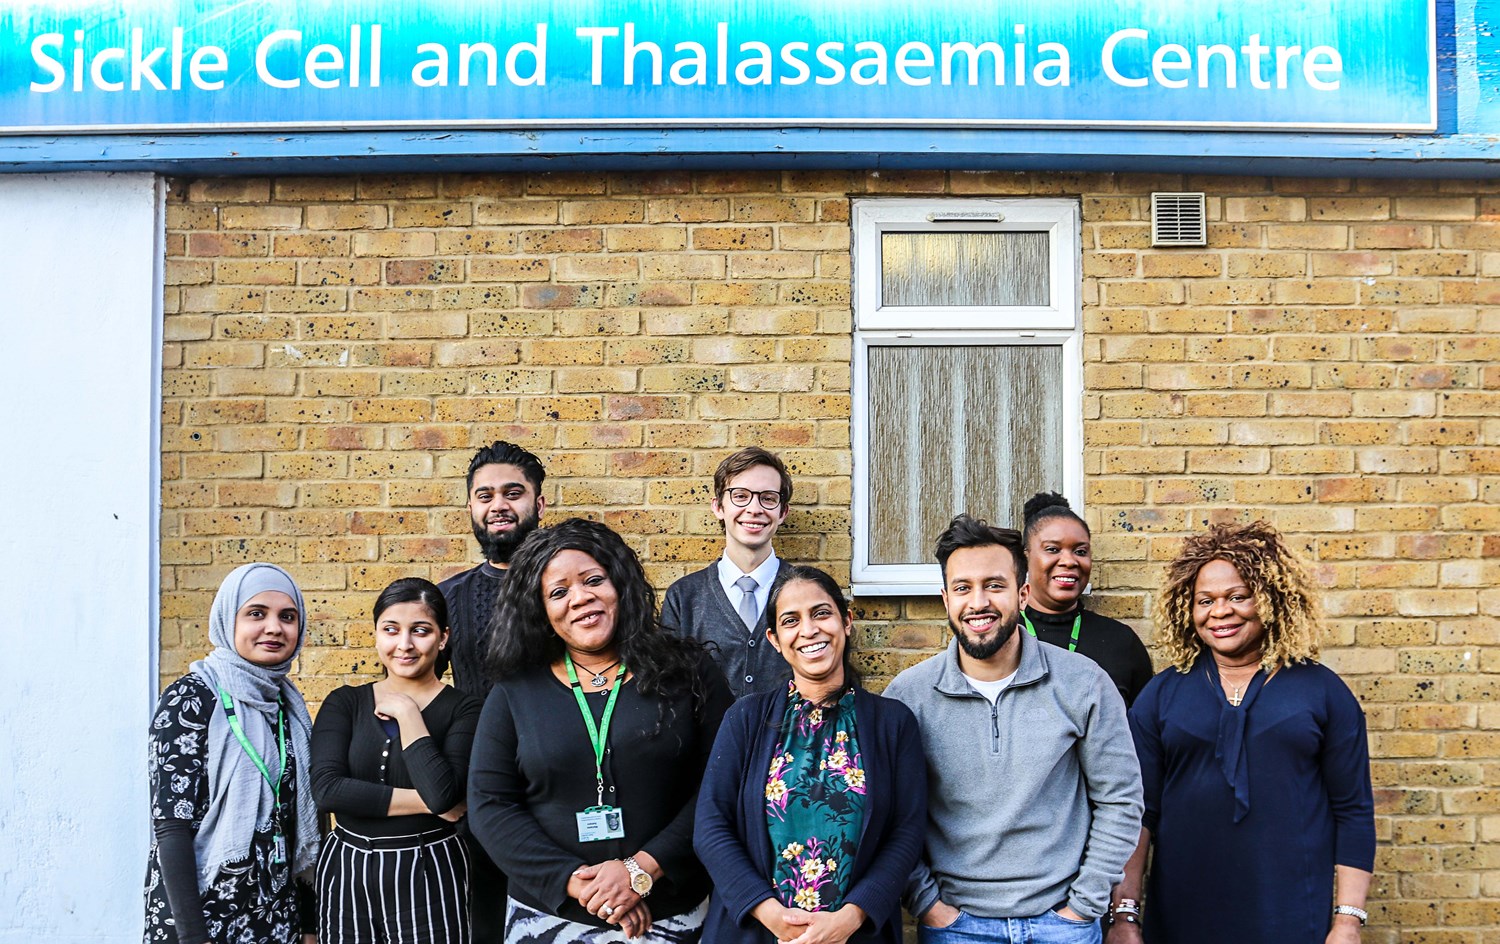 Sickle Cell and Thalassaemia